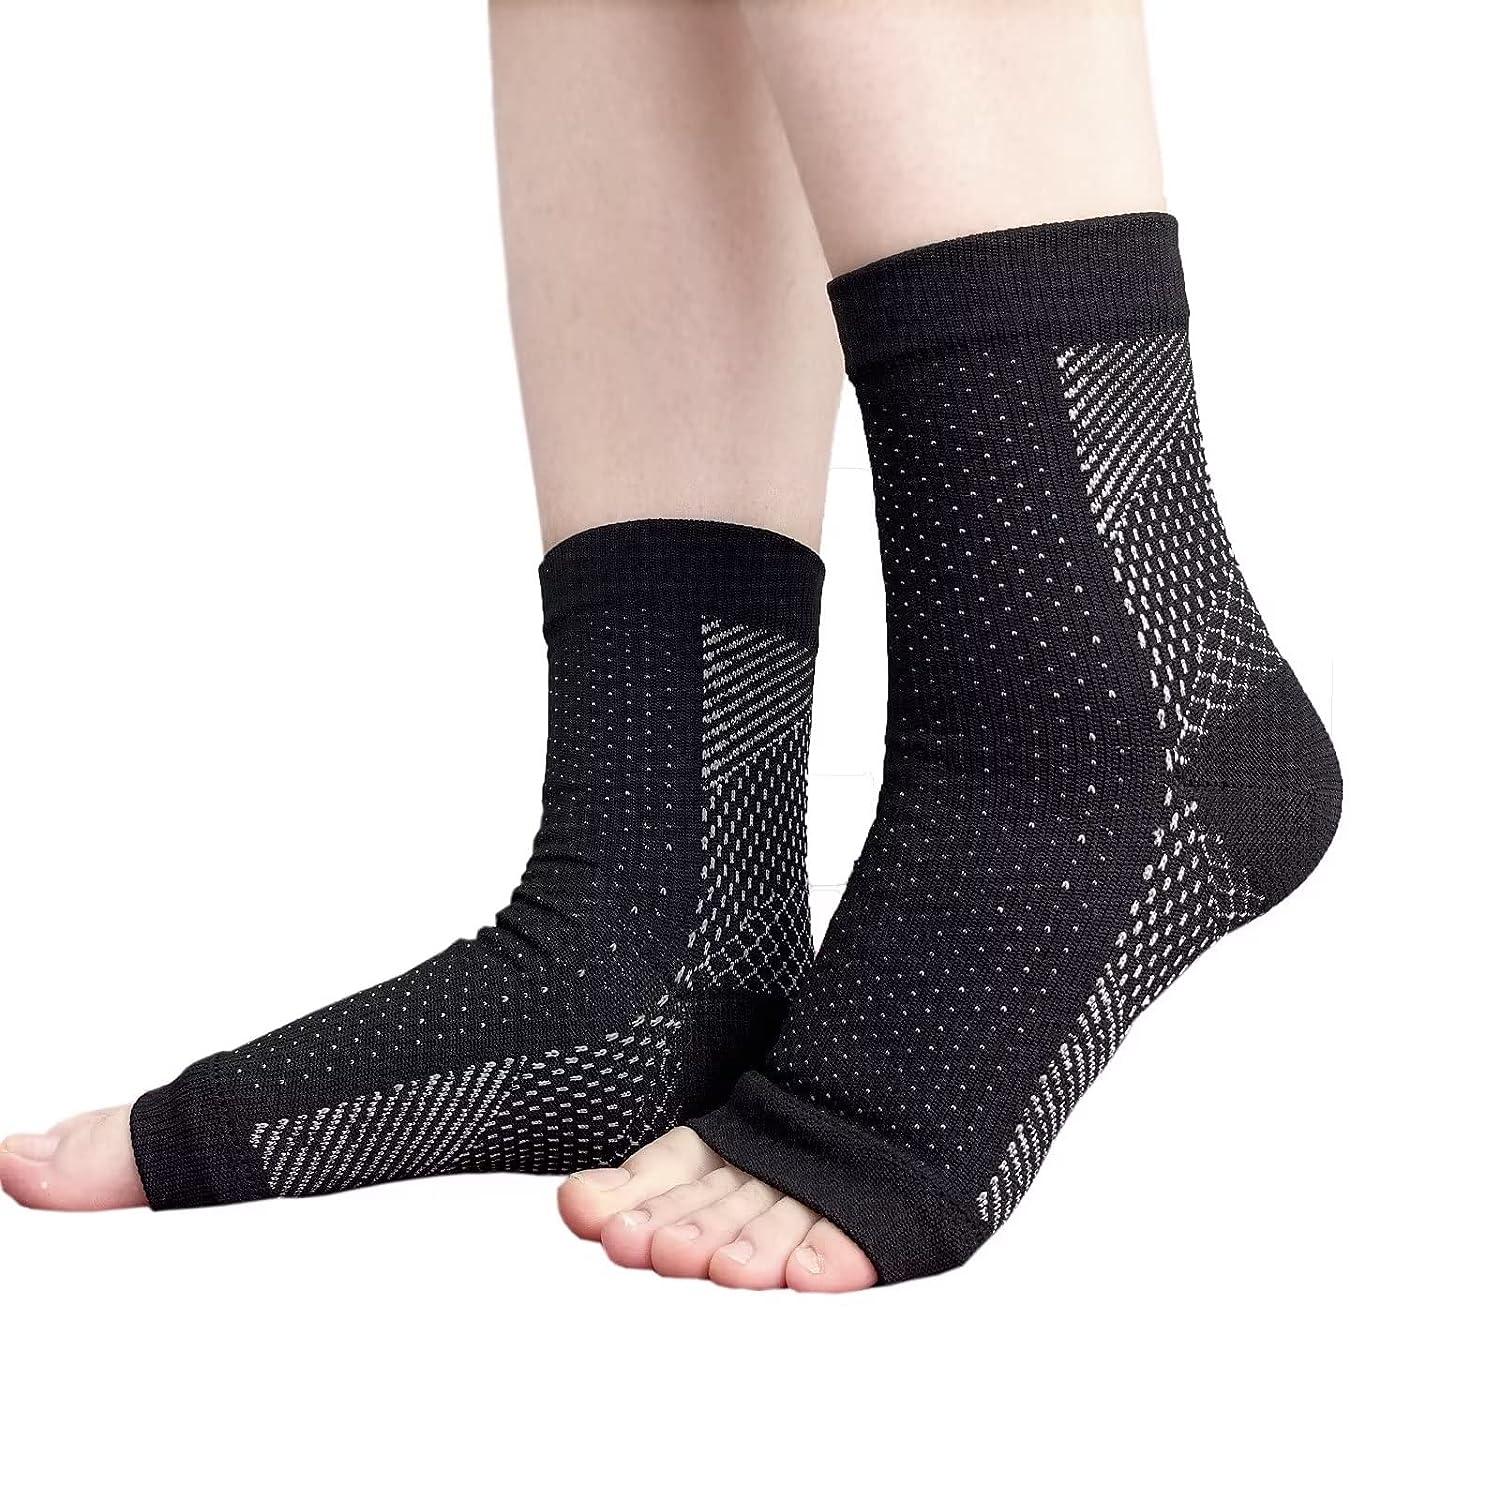 Unsexual Compression Socks, Best Support Sock For Siimming Leg